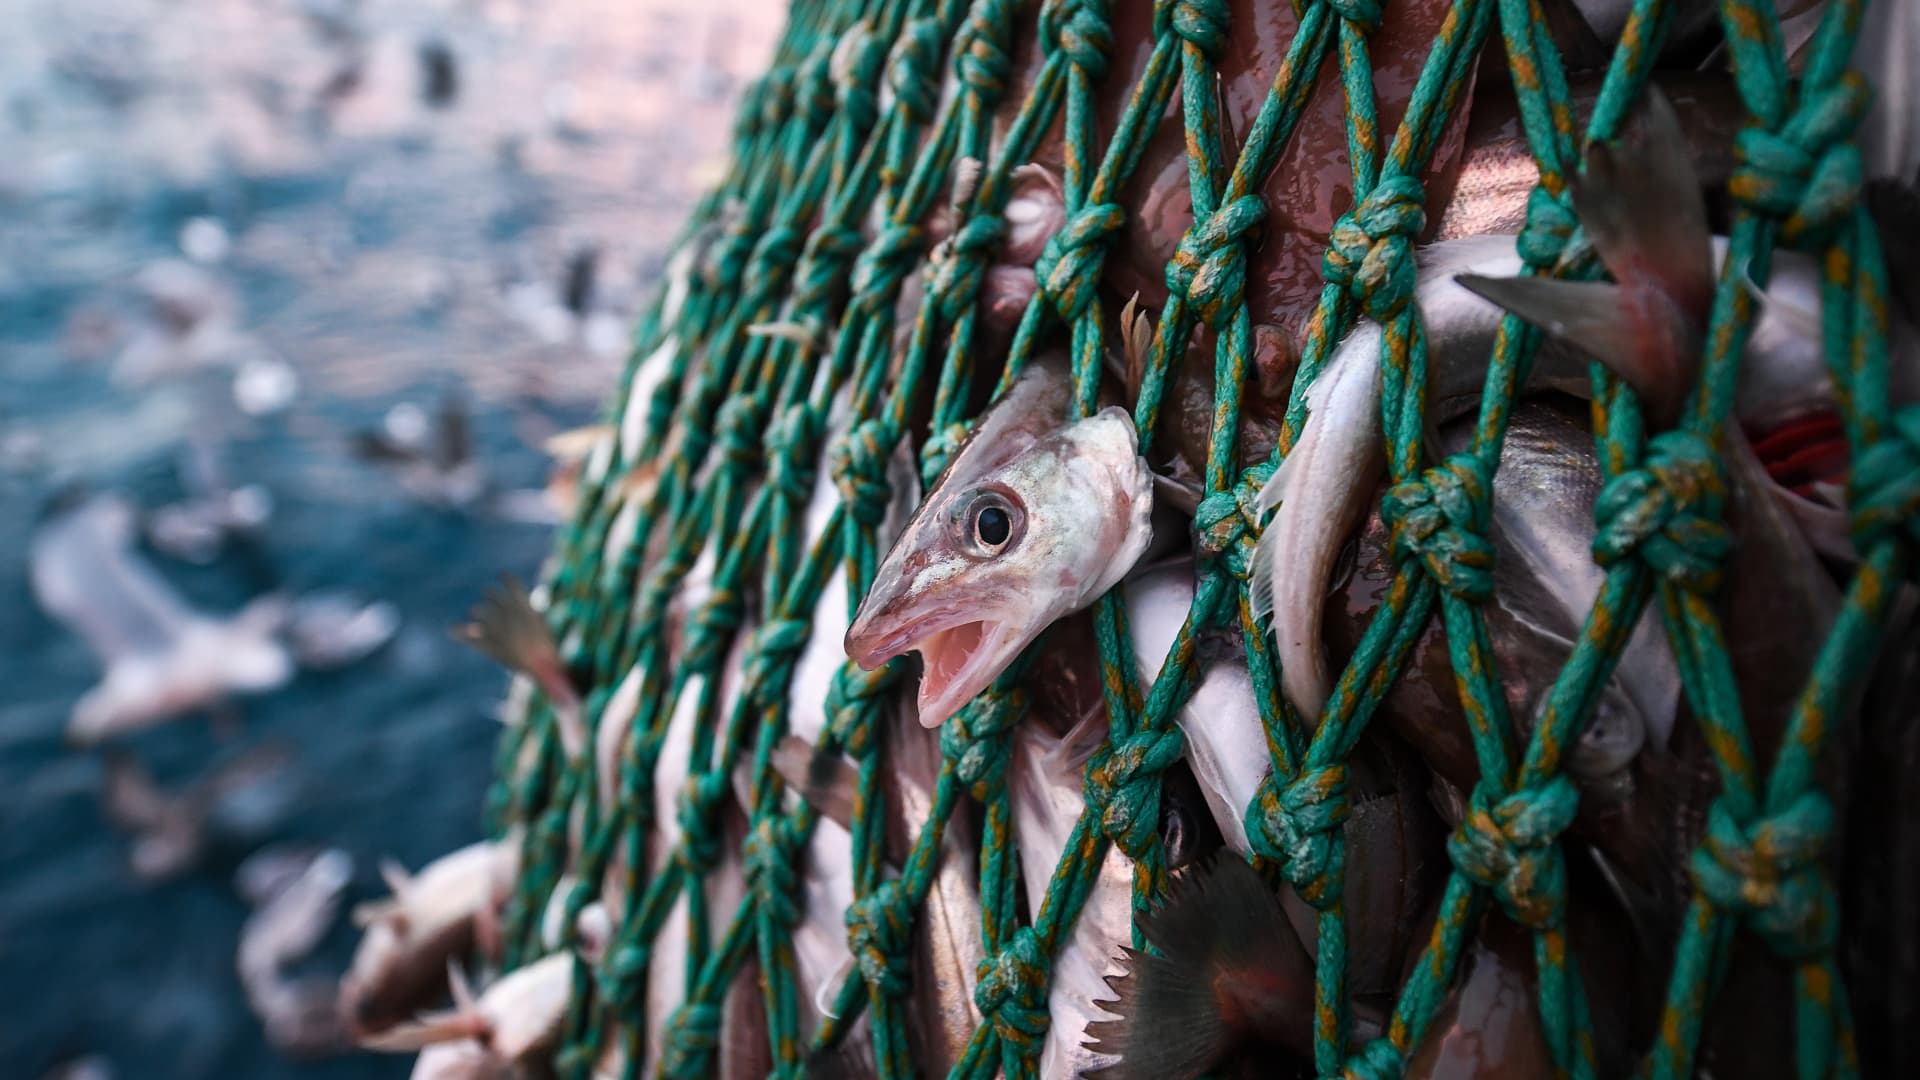 The U.S. is not harvesting as many fish as it could, driving up imports